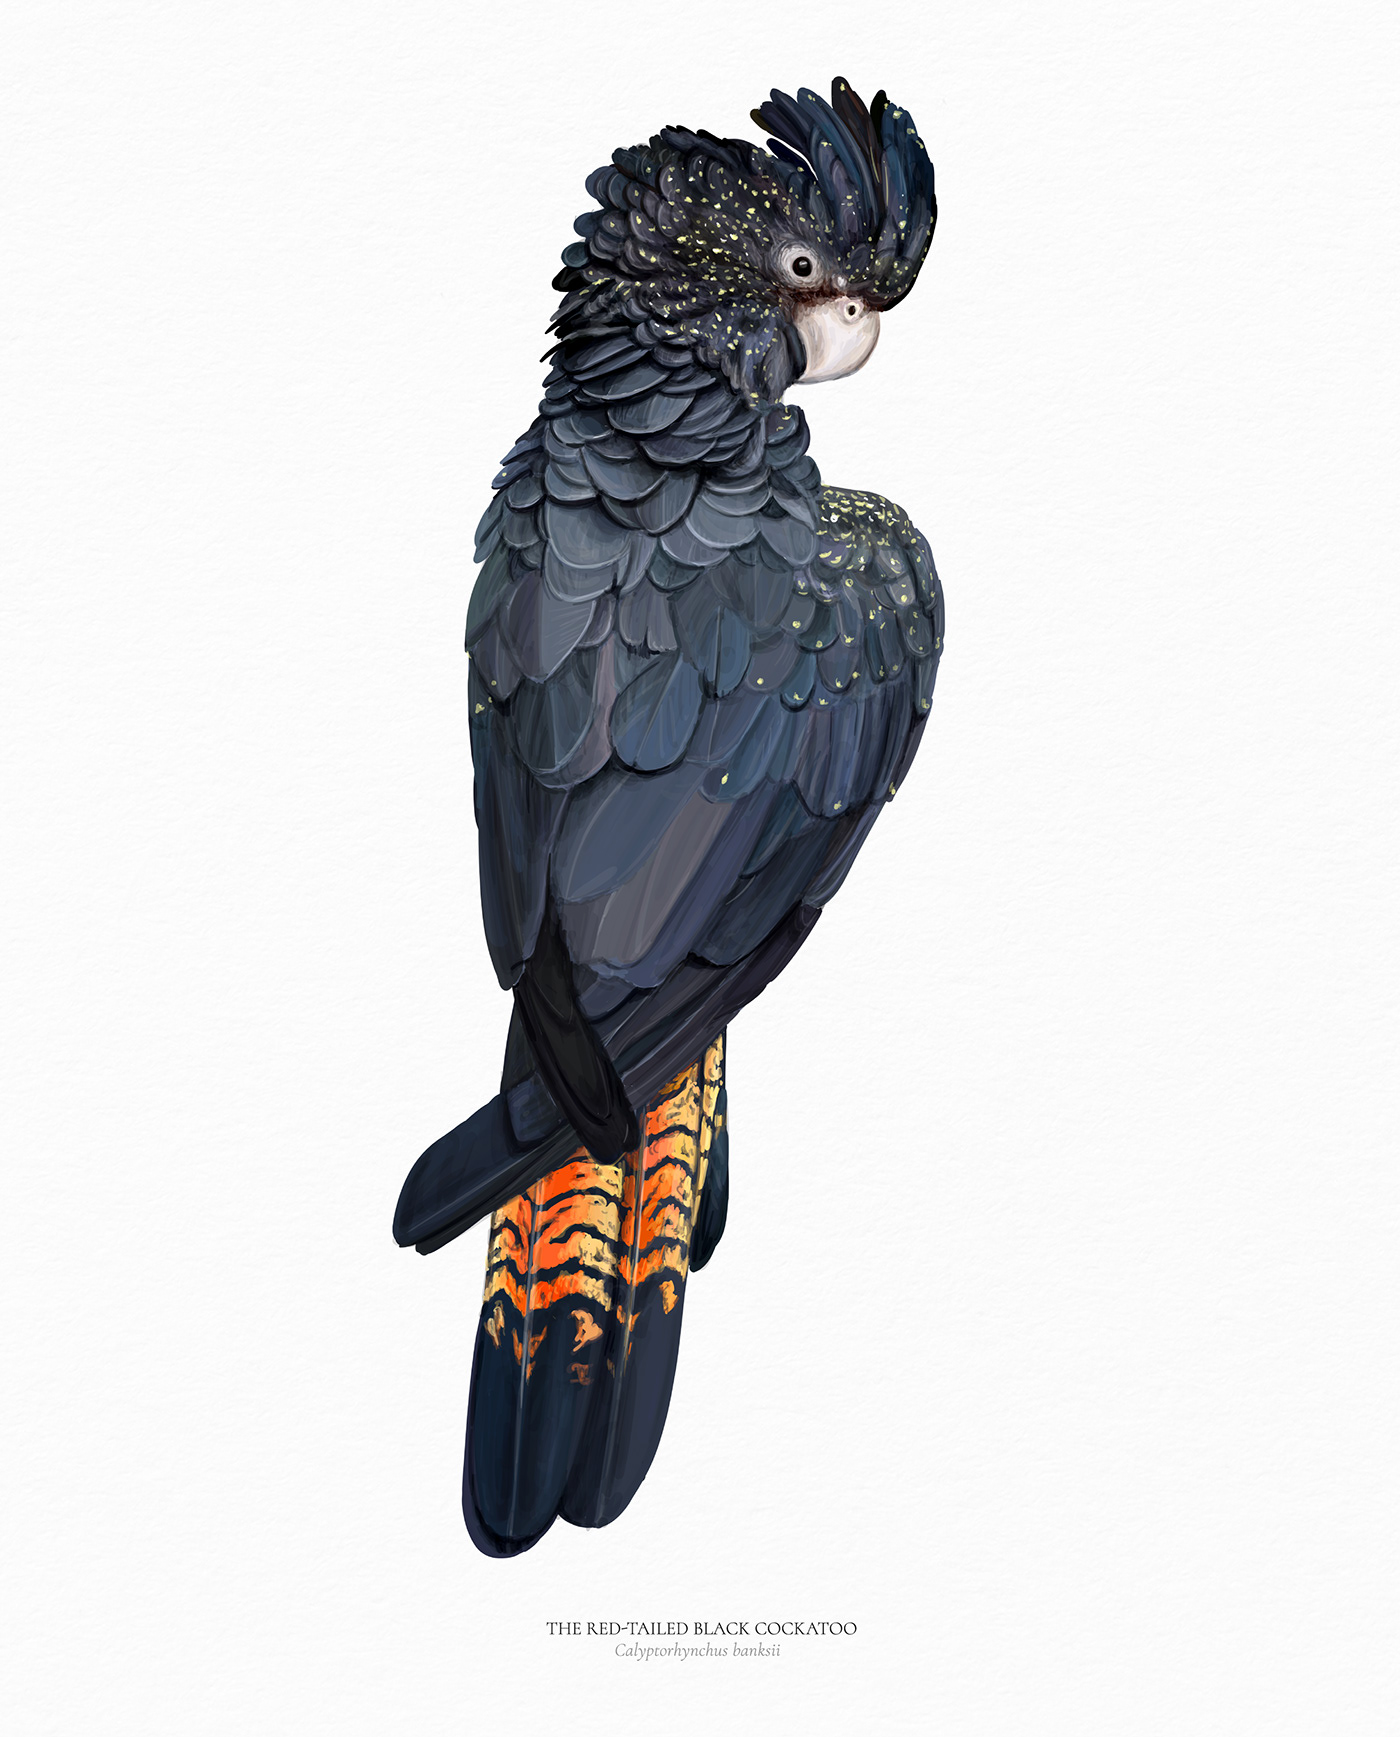 Red-tailed black cockatoo
also known as Banksian- or Banks' black cockatoo.
Vector illustration.